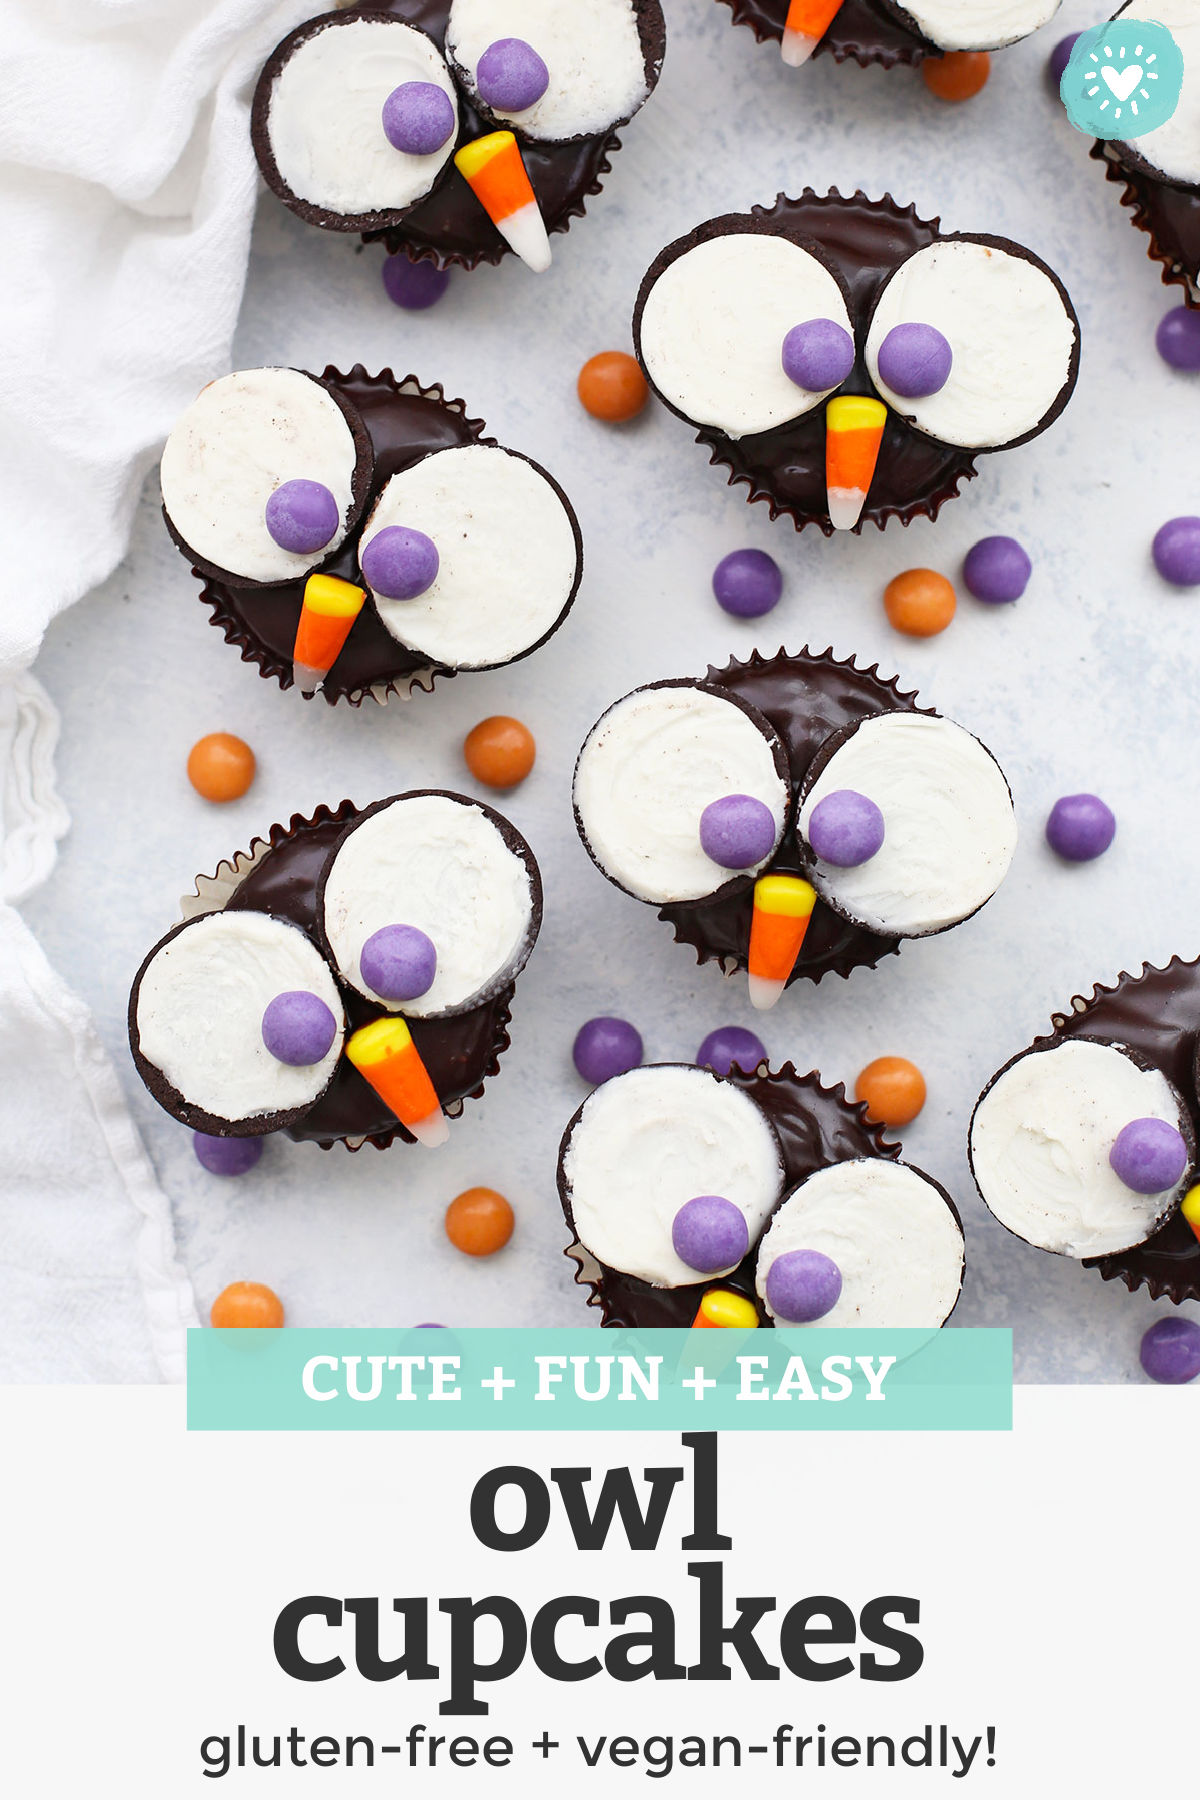 Owl Cupcakes - These adorable little owl cupcakes are perfect for parties or Halloween. Plus, it's easy to make them gluten free & dairy free! // gluten free cupcakes // owl cupcakes // vegan cupcakes // halloween cupcakes // gluten free halloween ideas // halloween treats // dairy free cupcakes // vegan chocolate frosting #owlcupcakes #halloweencupcakes #cupcakes #glutenfreecupcakes #cupcakedecorating